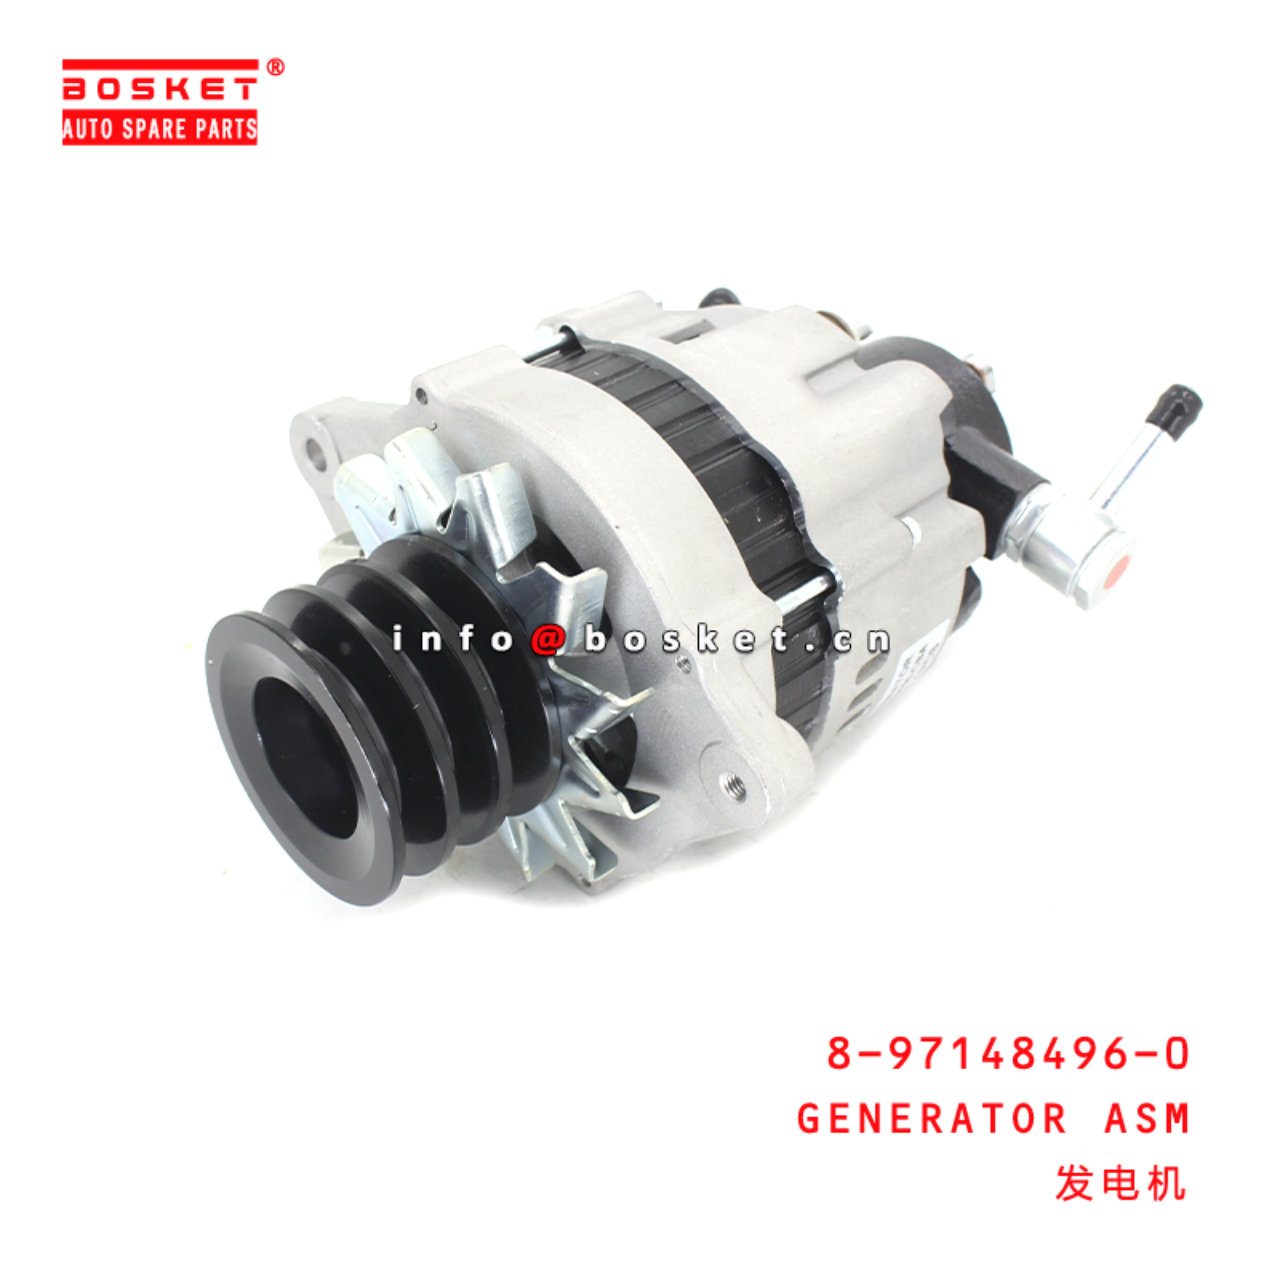 8-97148496-0 Generator Assembly suitable for ISUZU 4HF1 8971484960 